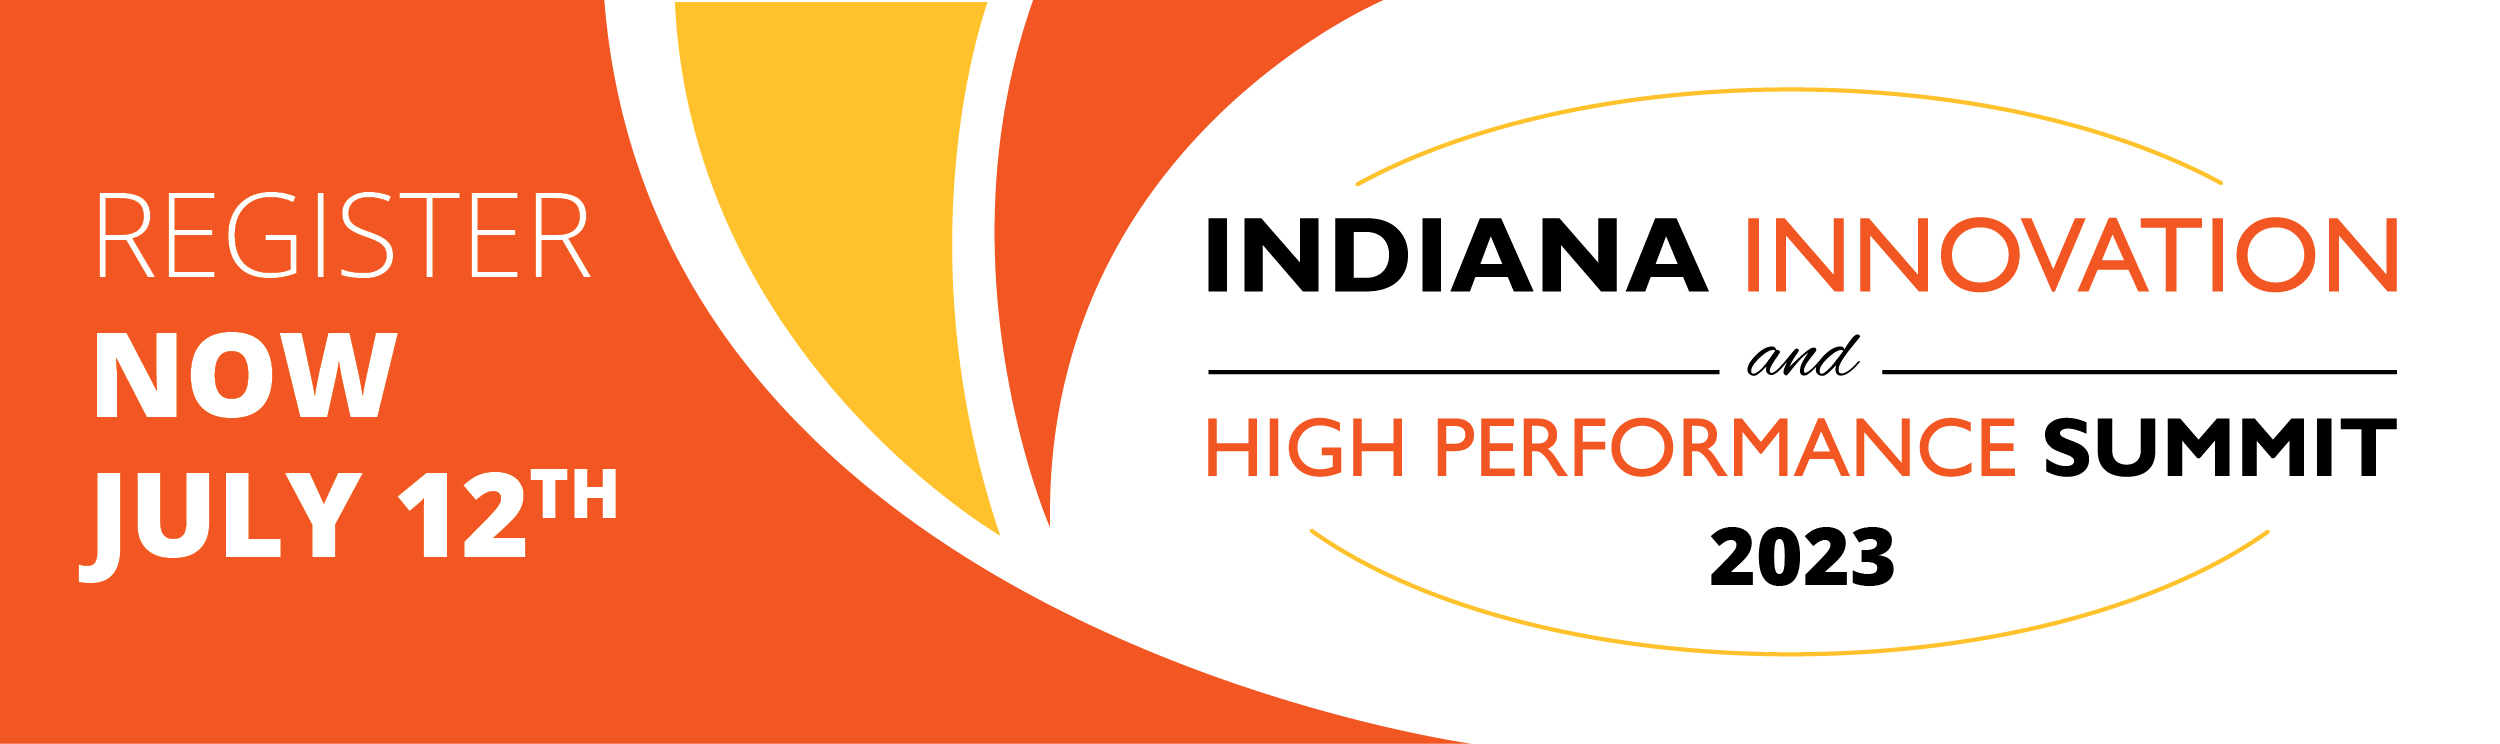 Indiana Innovation and High Performance Summit Register Now 2023